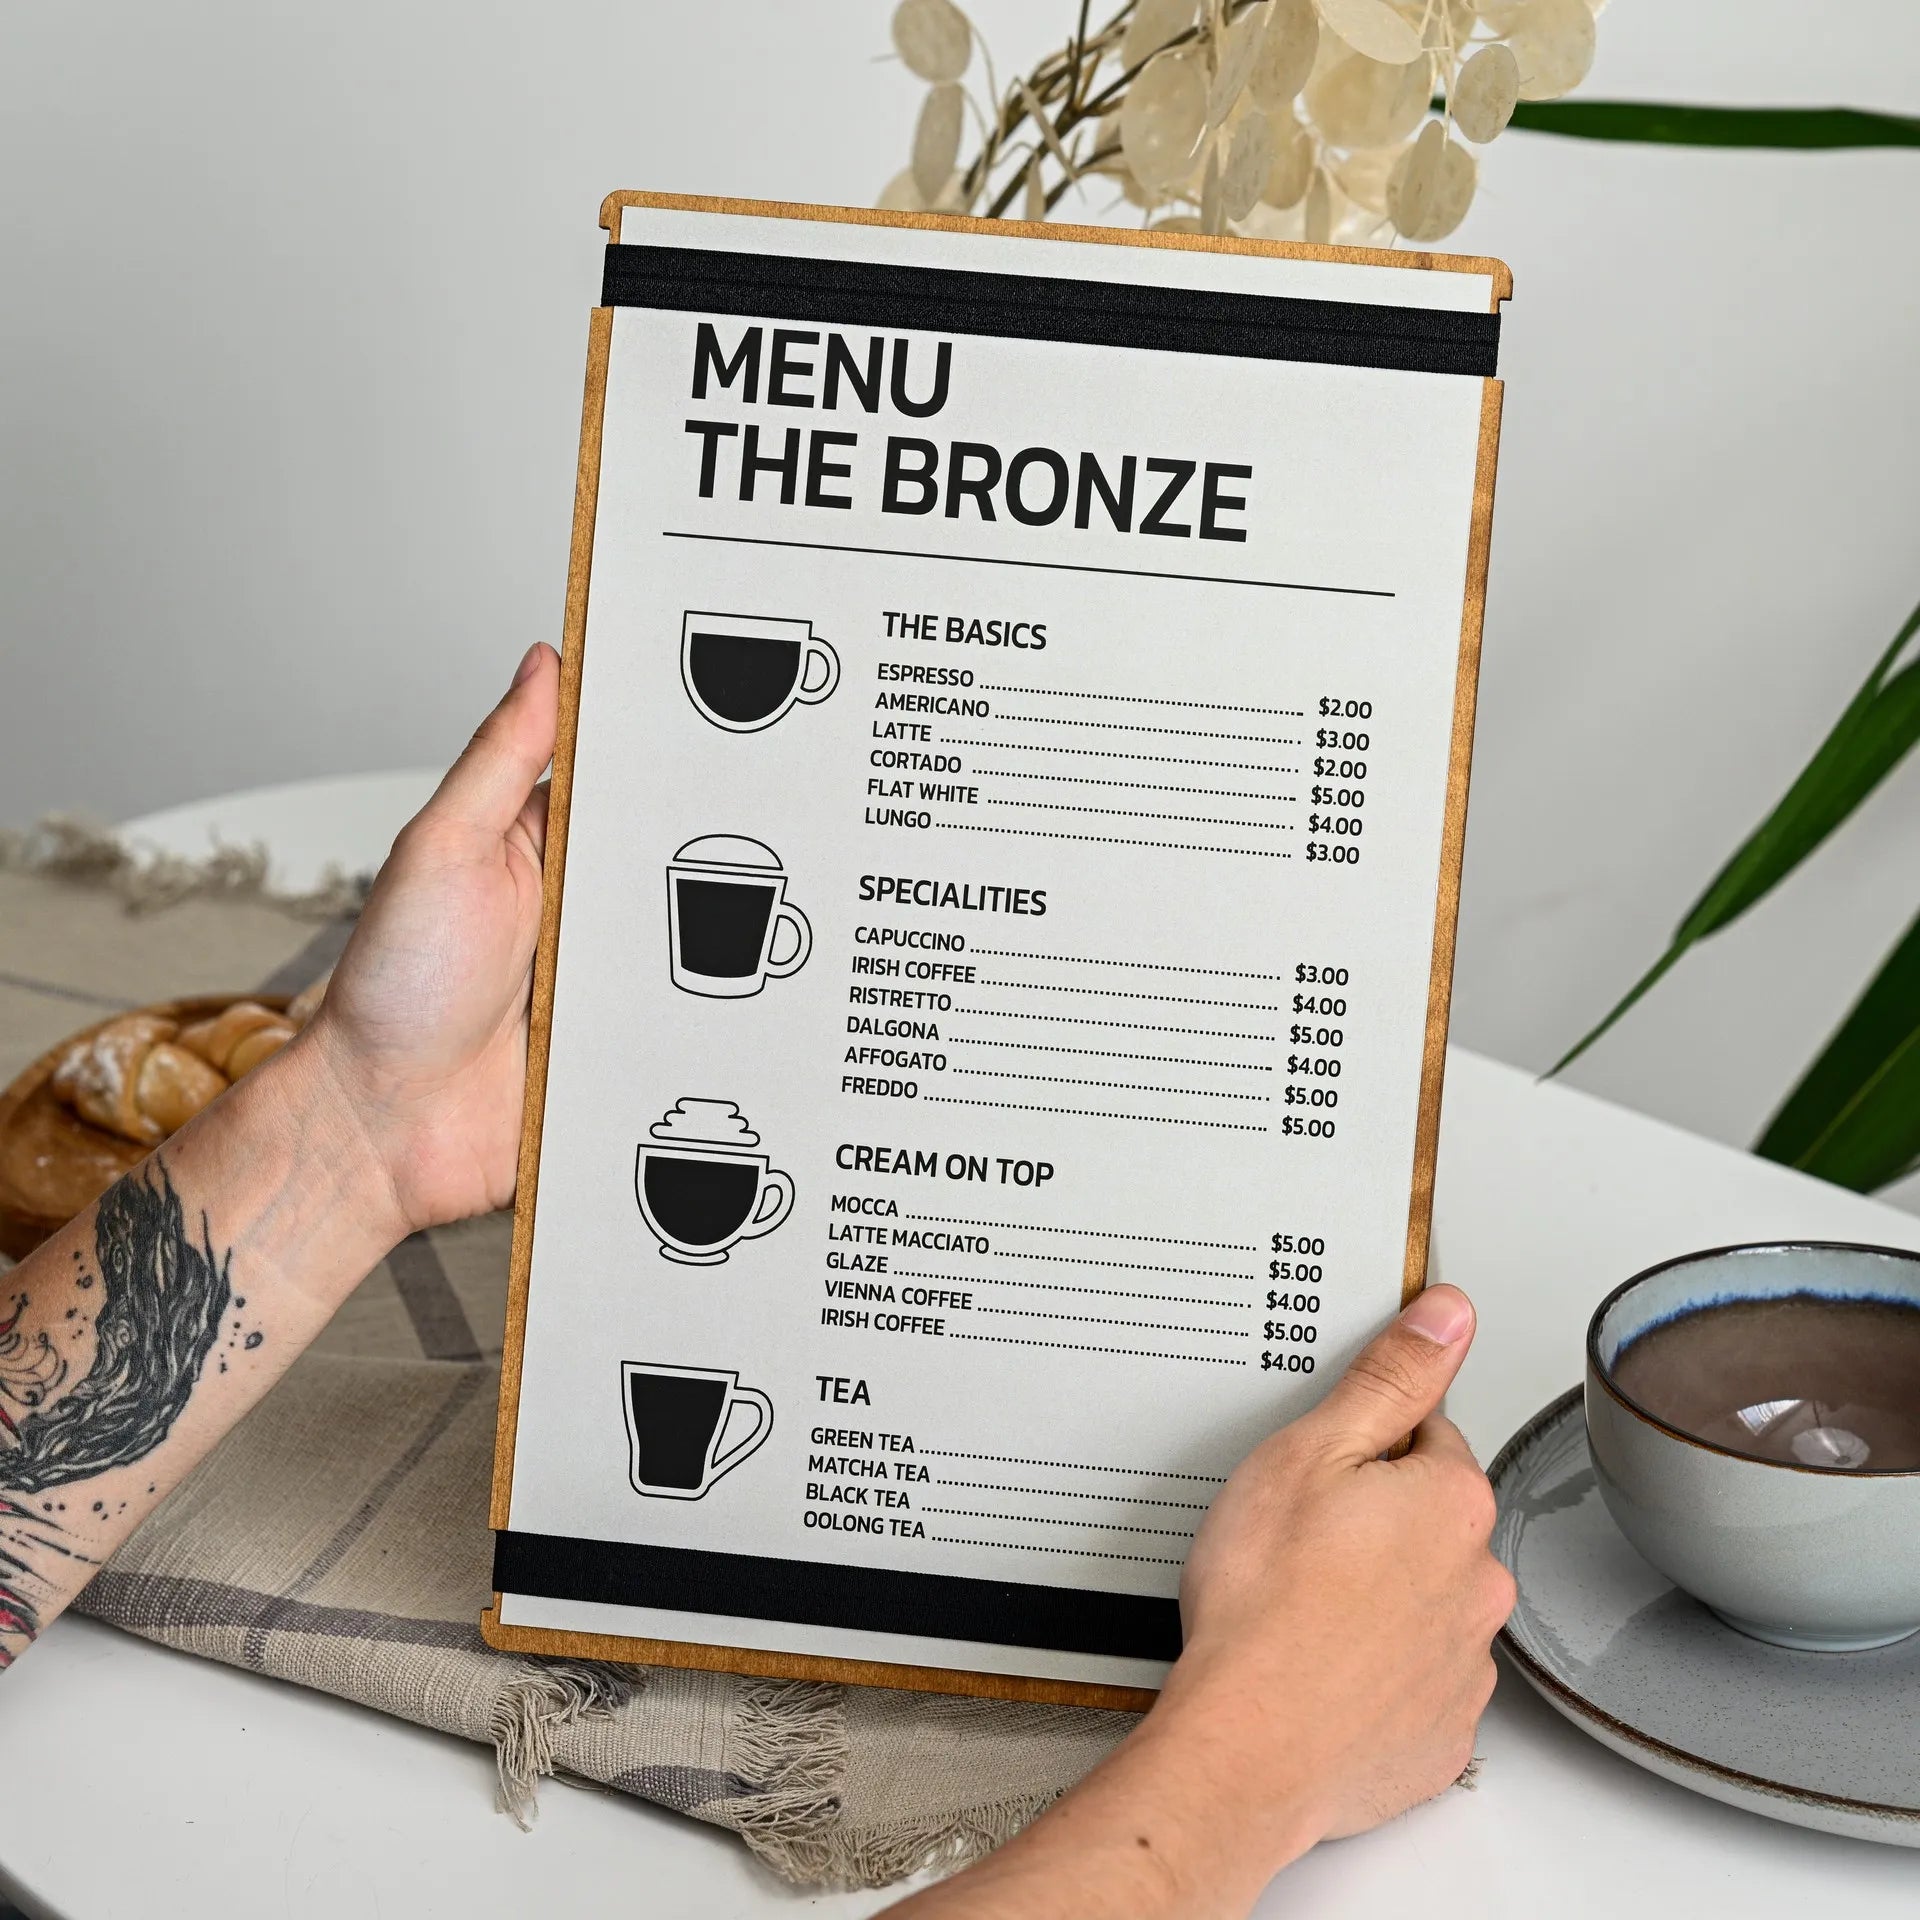 Engraved Menu Holder: Adds a personalized touch to your menu display.